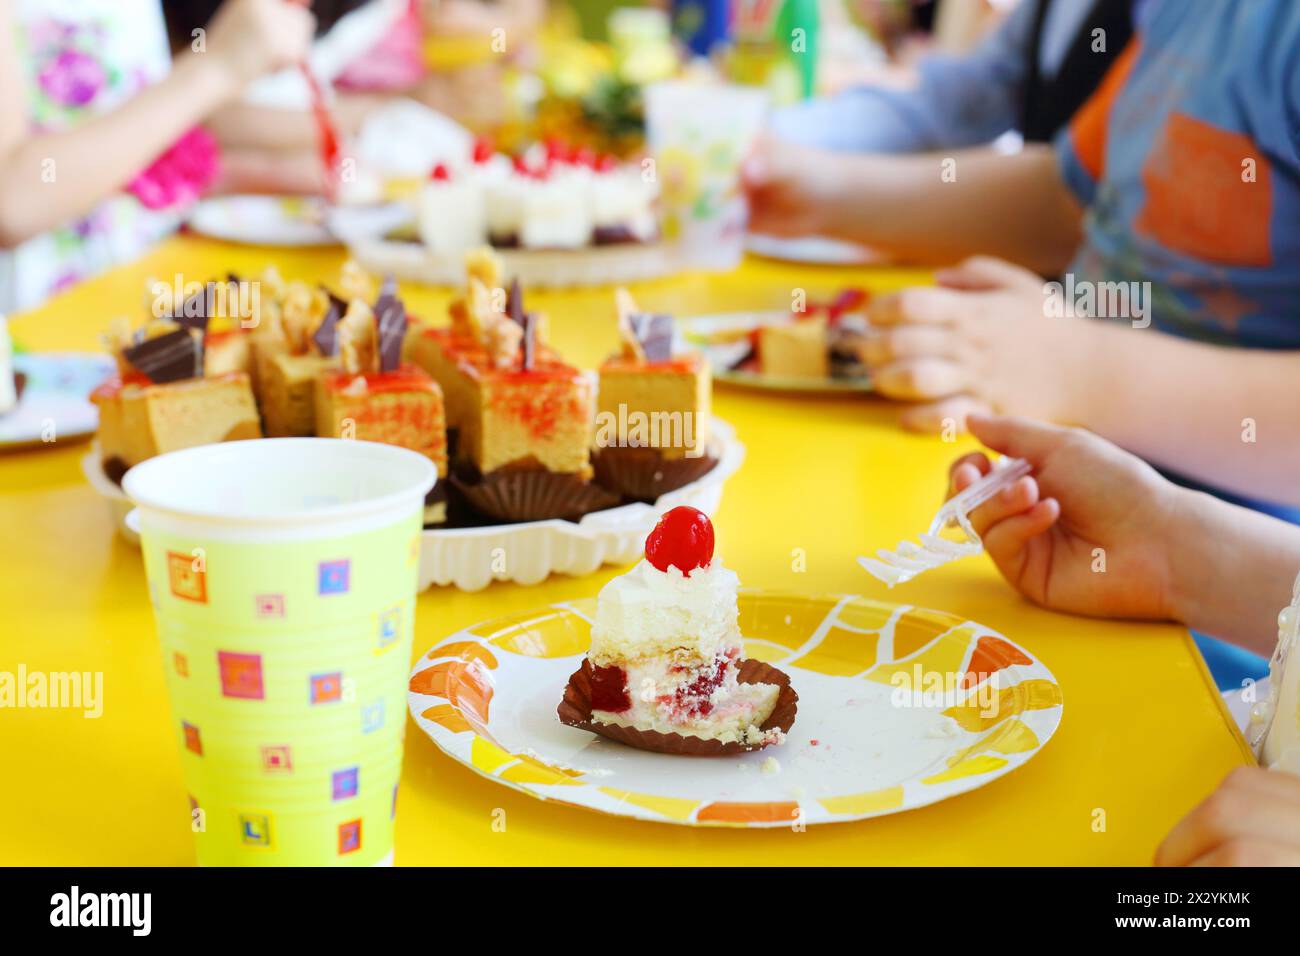 Hands of kids eating delicious little cakes on yellow table. Focus on cake. Stock Photo